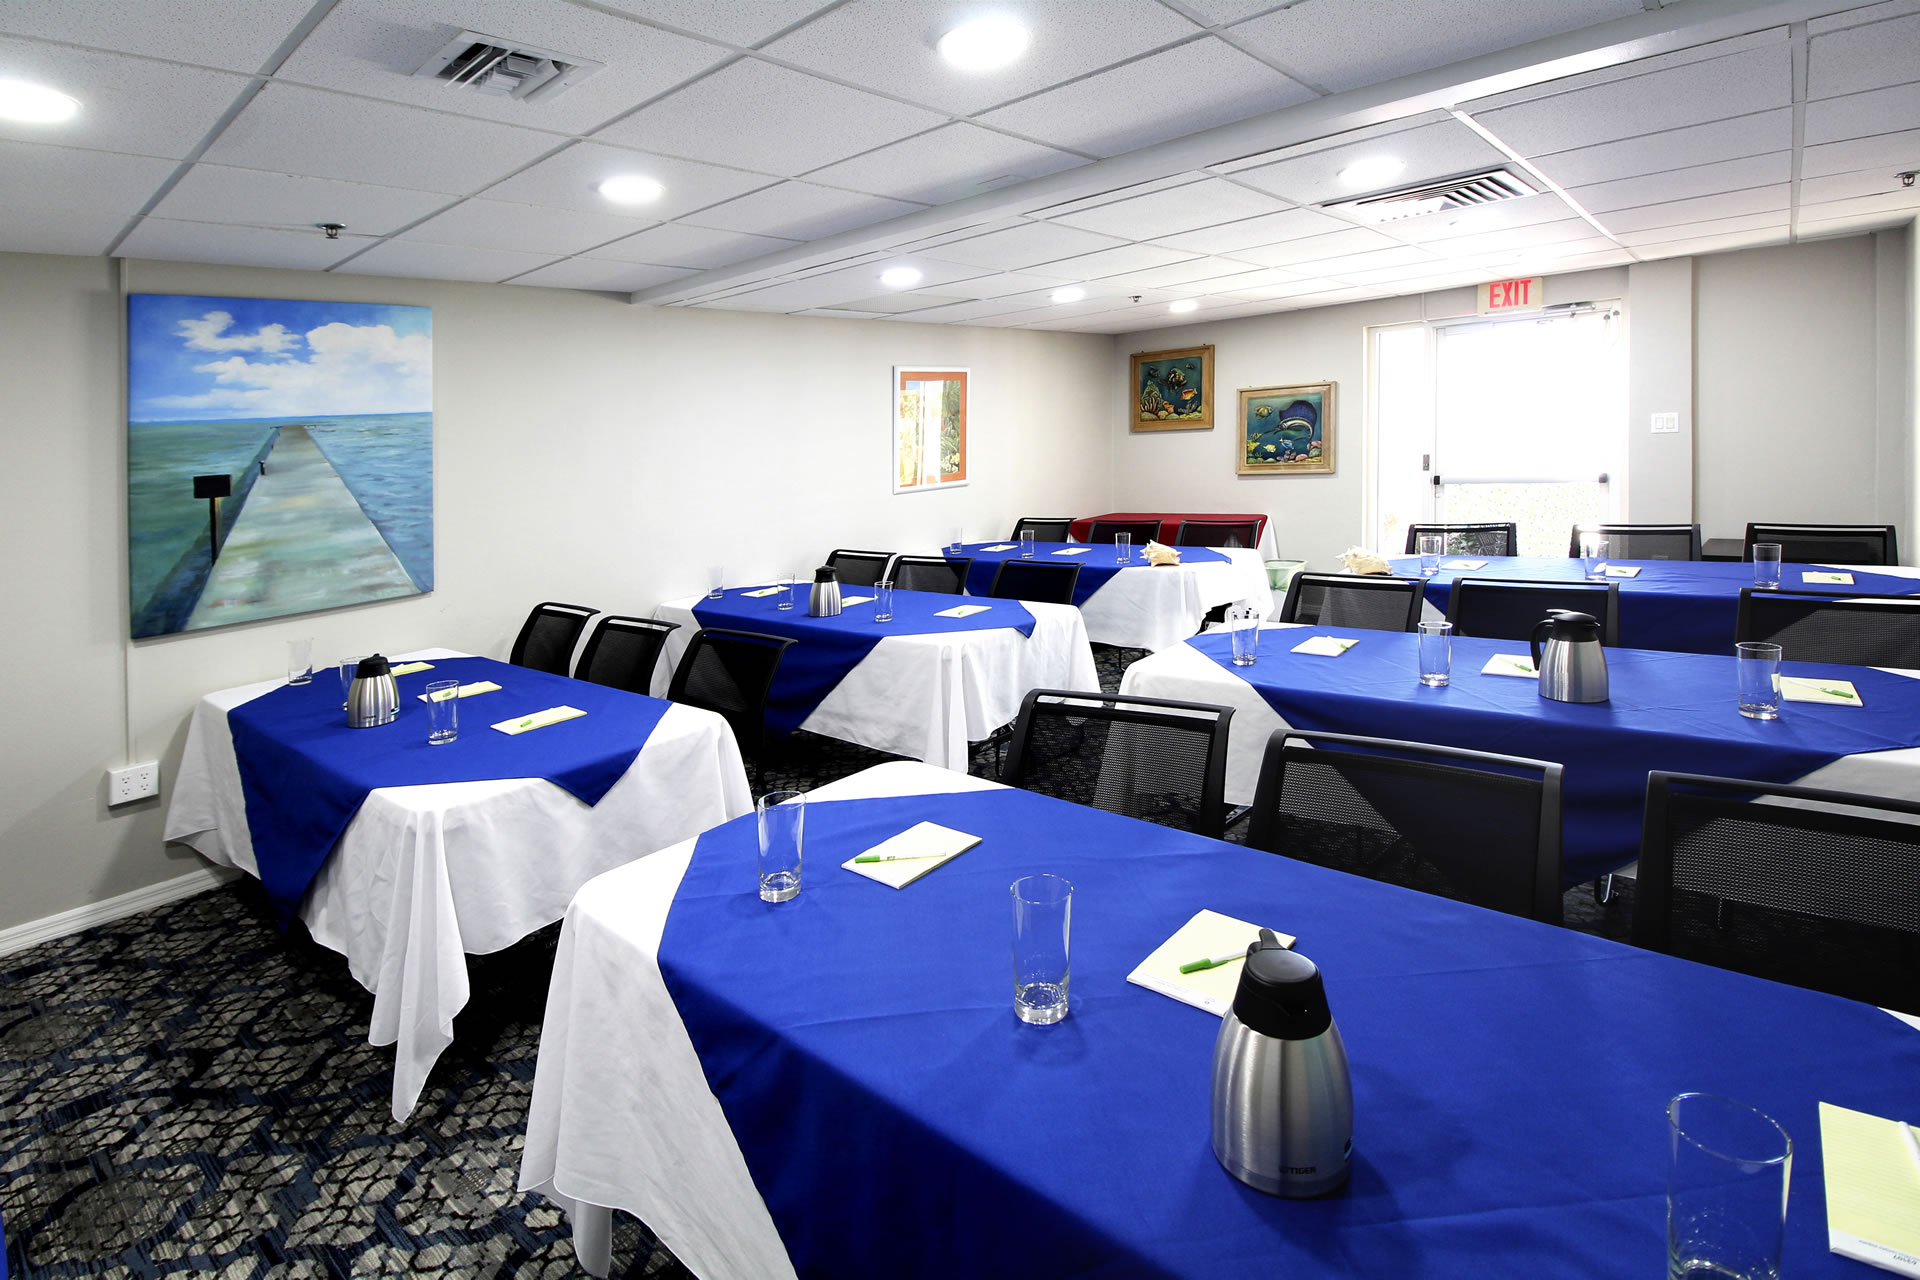 Meeting space at the Grand Caymanian Resort configured in a classroom layout with blue and white table coverings and an exit door at the back of the room.